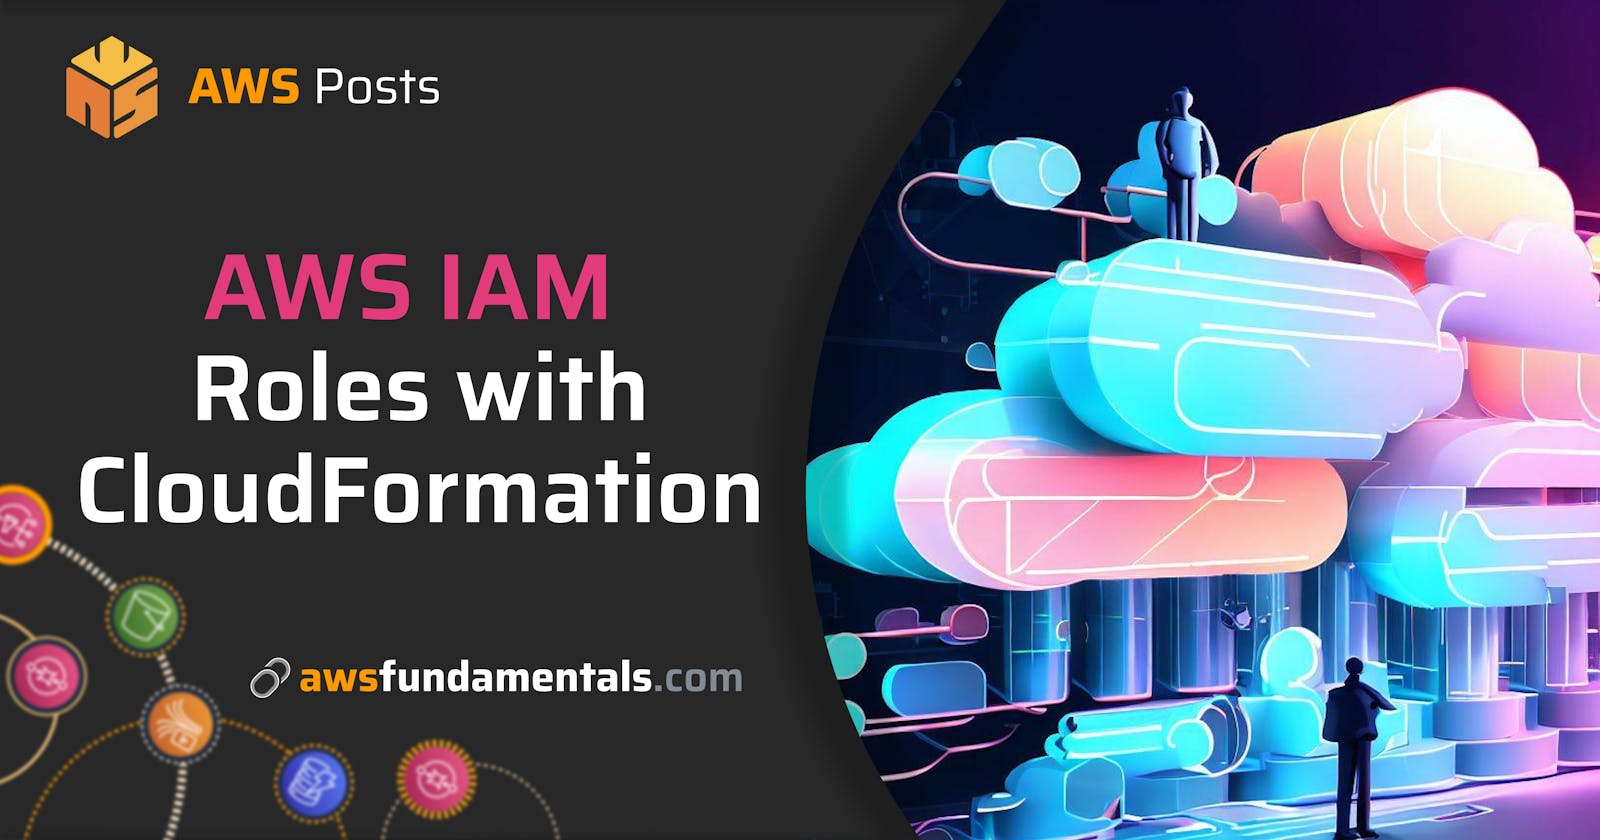 AWS IAM Roles with AWS CloudFormation